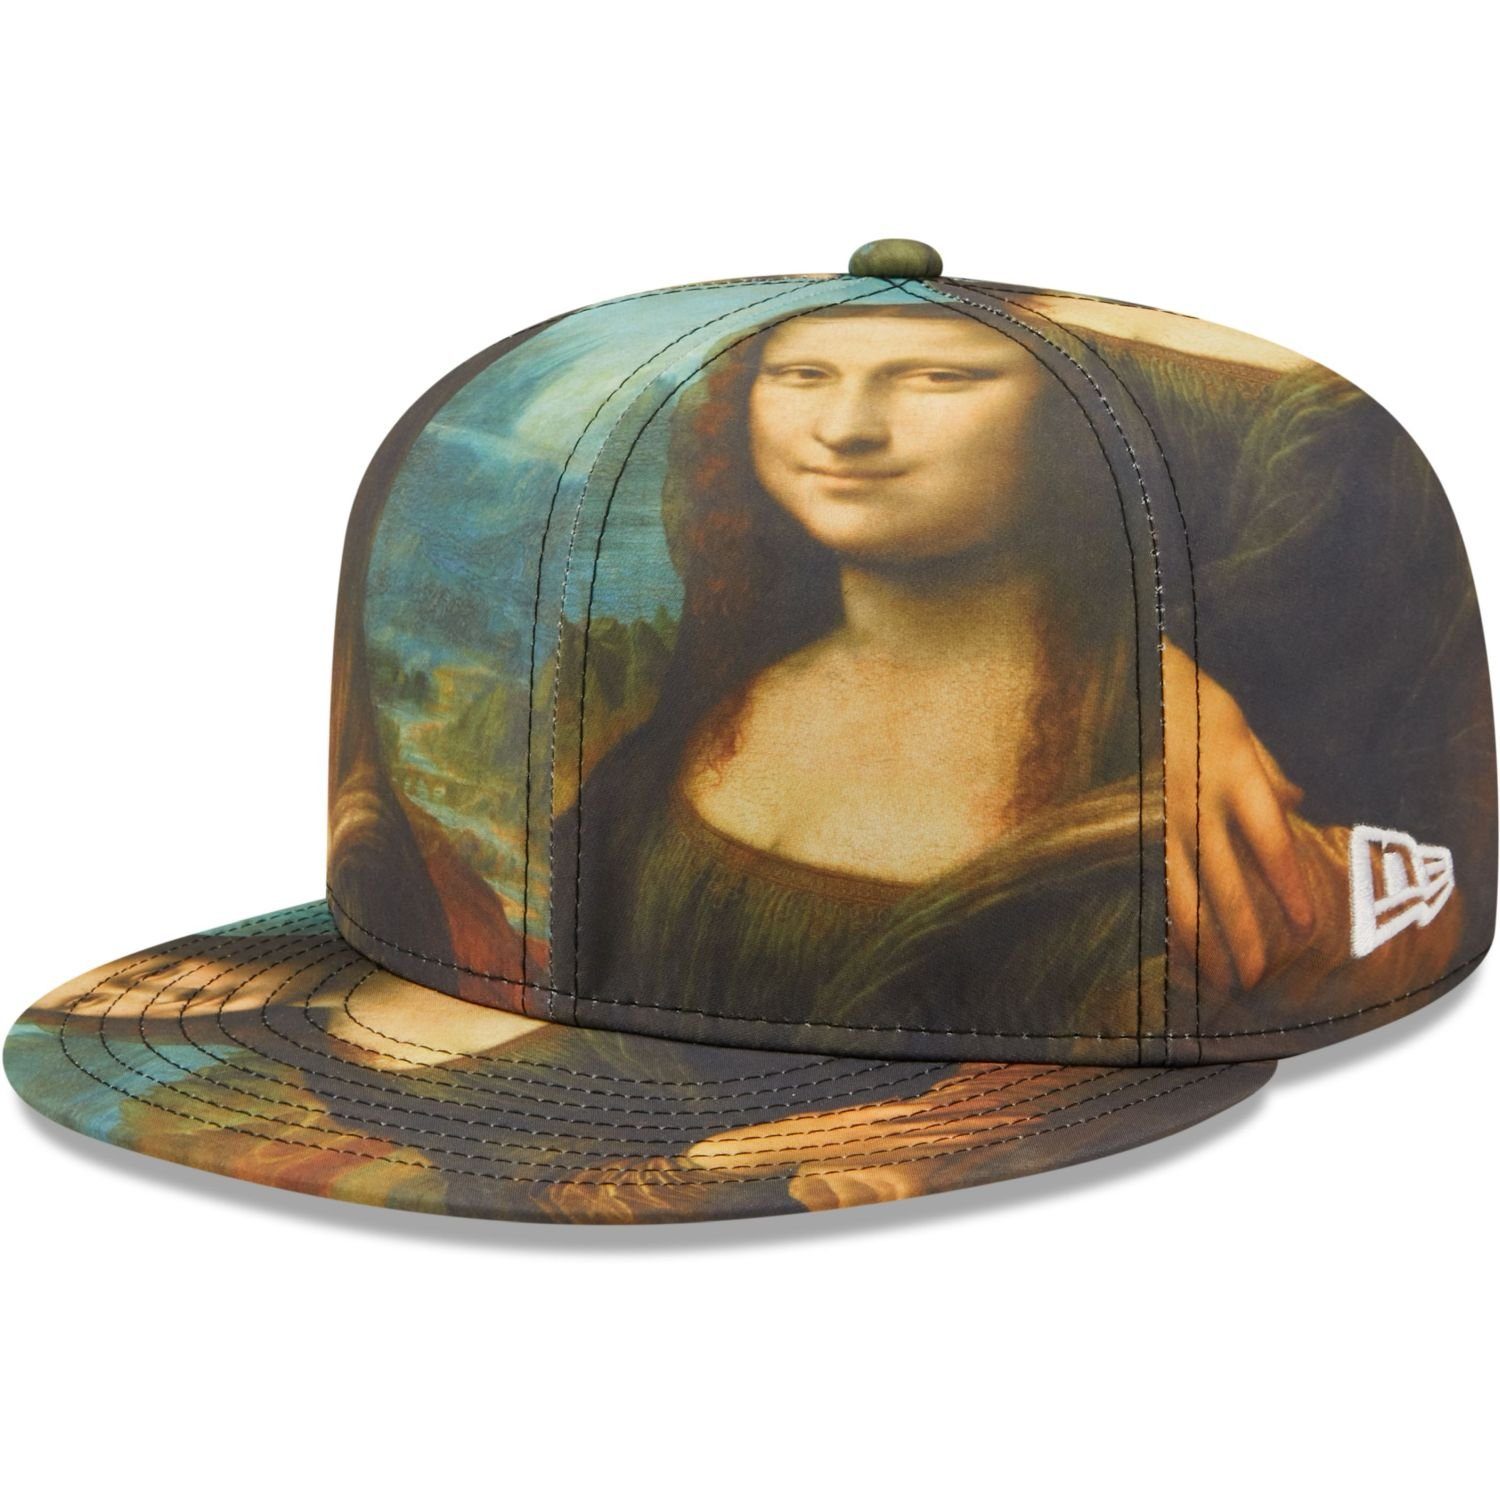 LOUVRE Mona New Fitted Lisa 59Fifty LE Cap Era